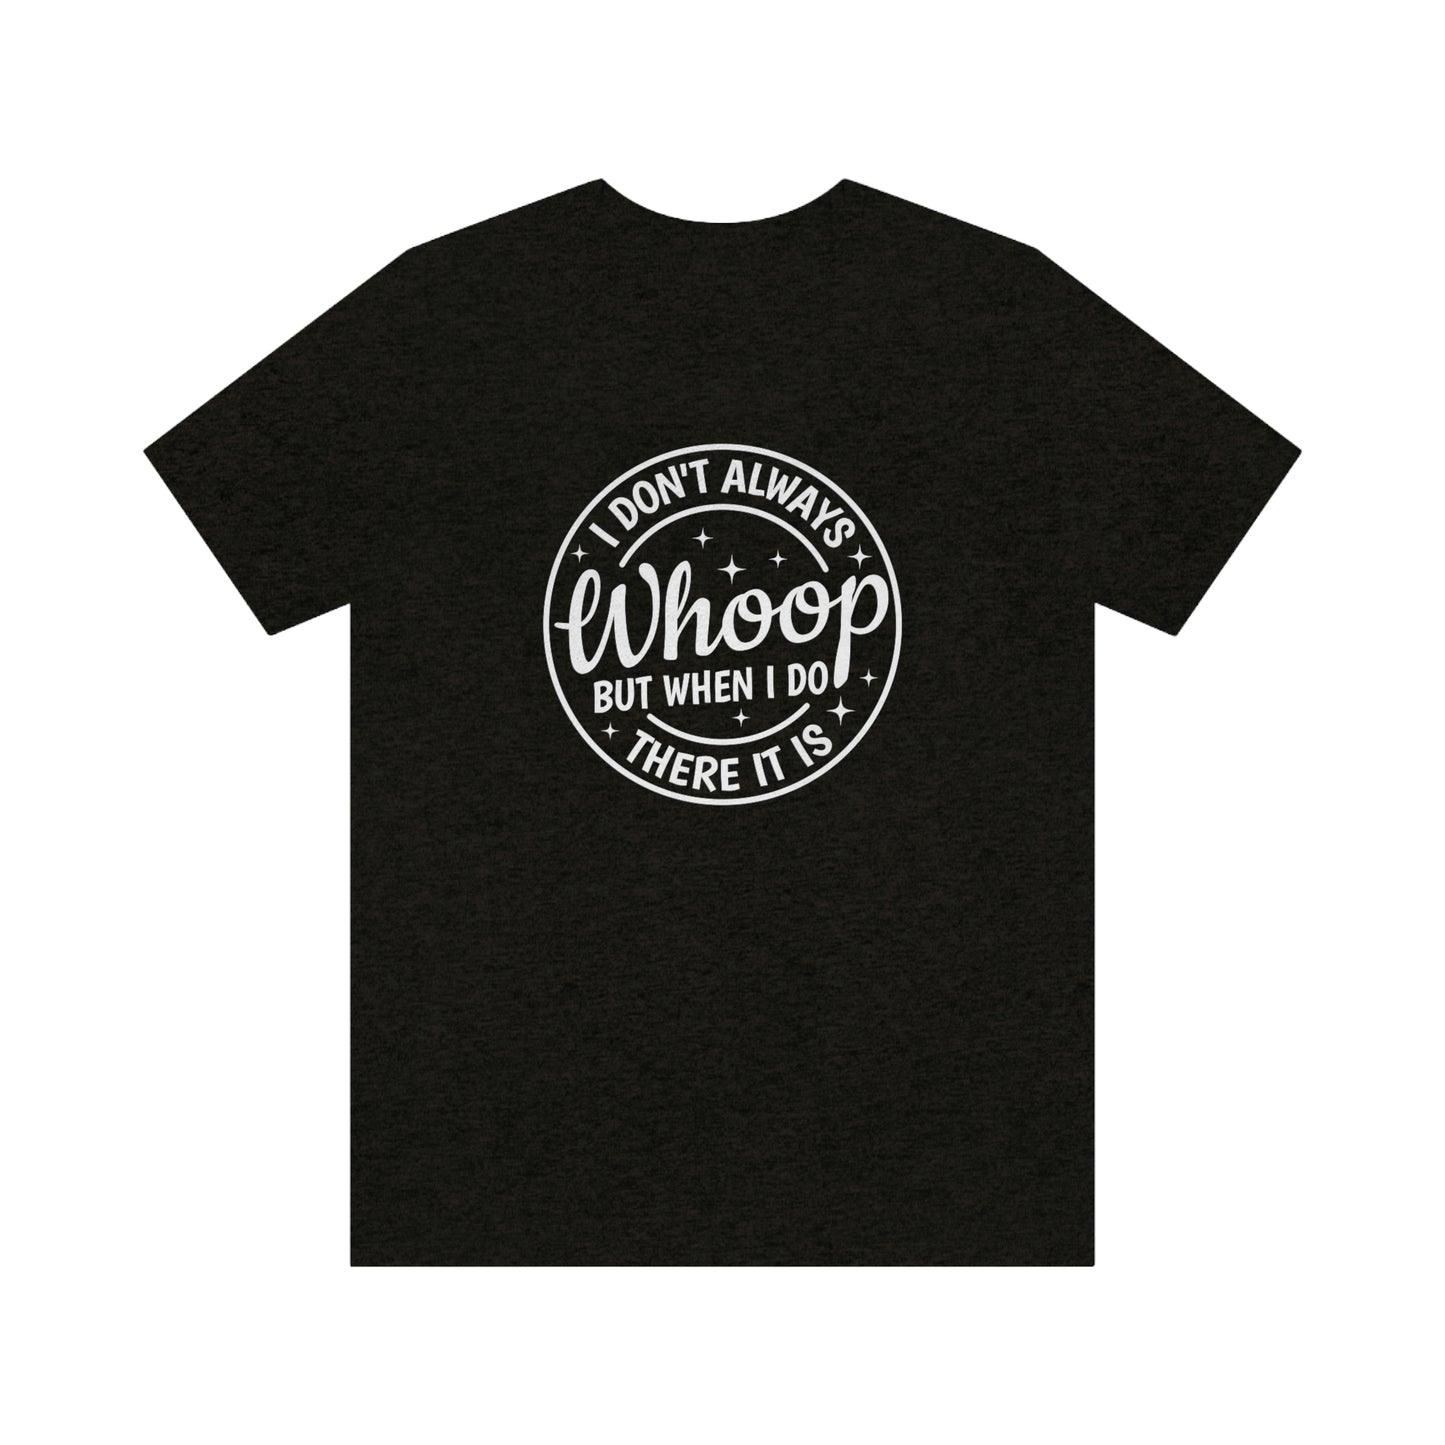 "Whoop there it is" Unisex Jersey Short Sleeve Tee